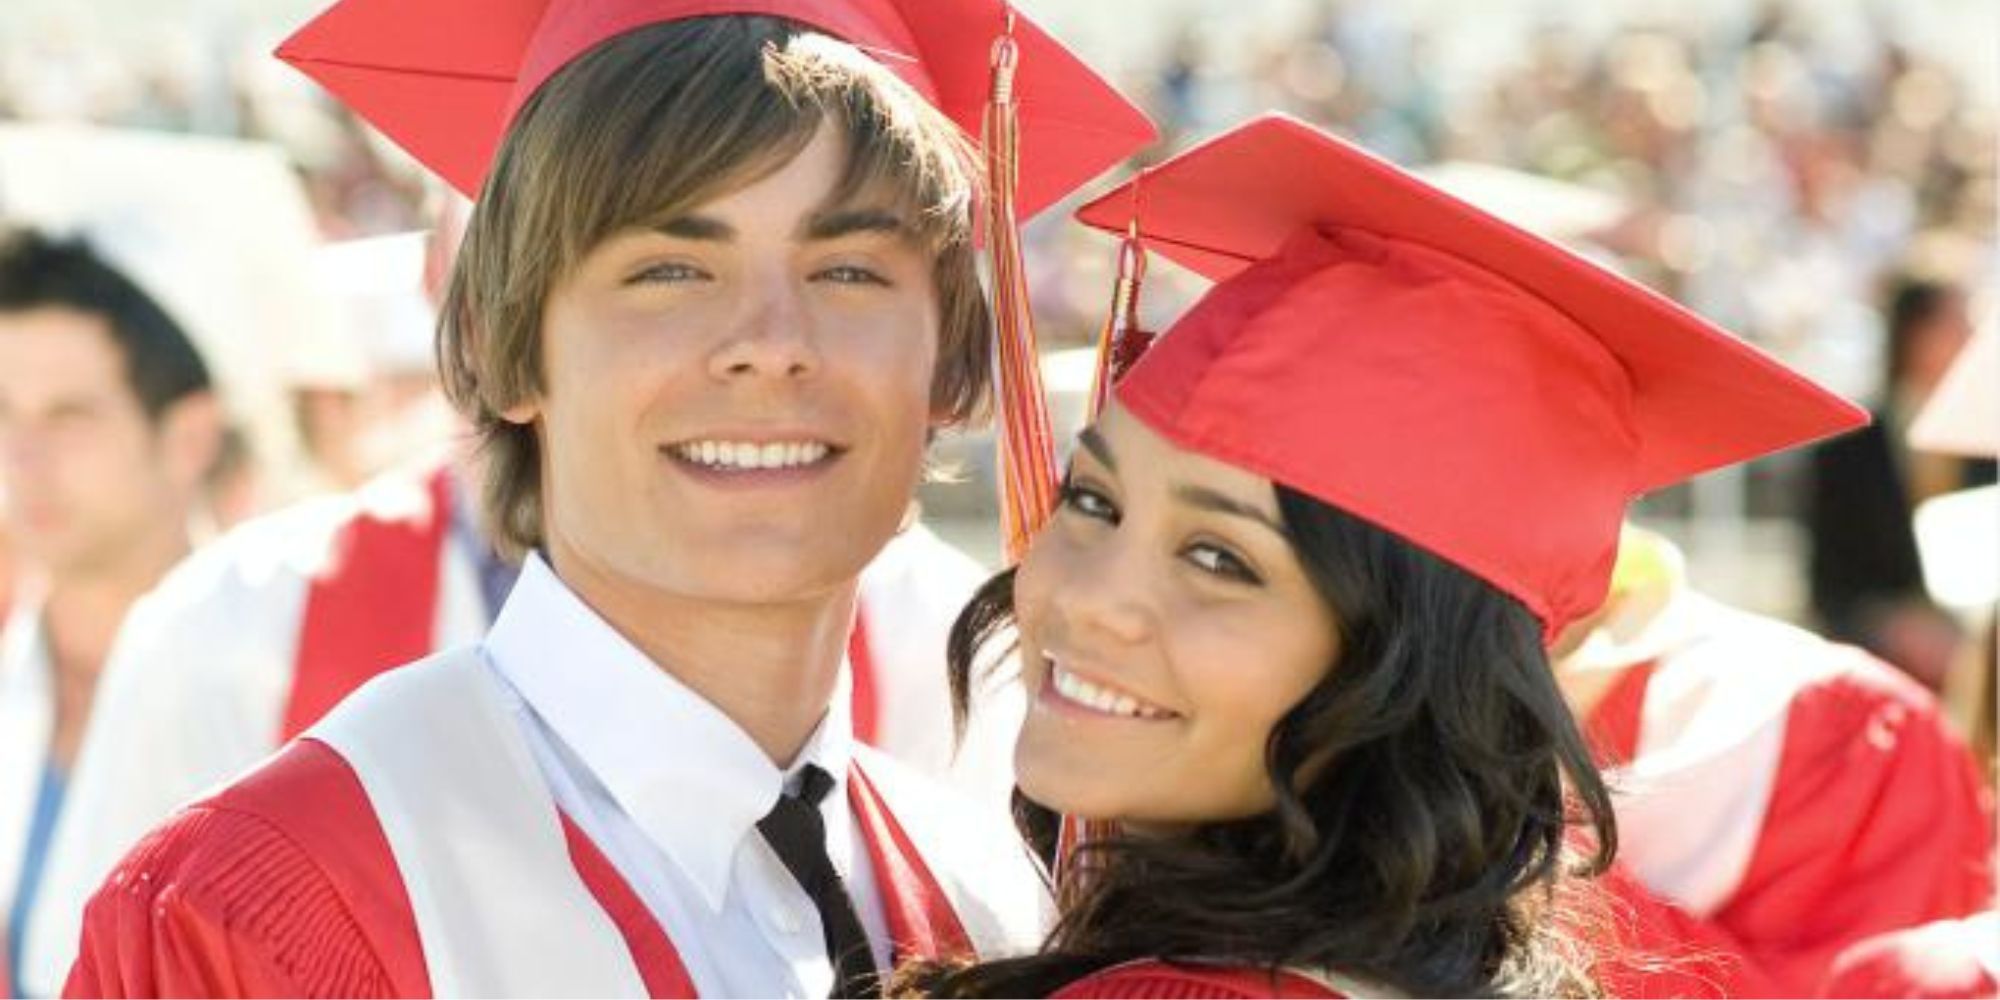 Zac and Vanessa from High School Musical at graduation